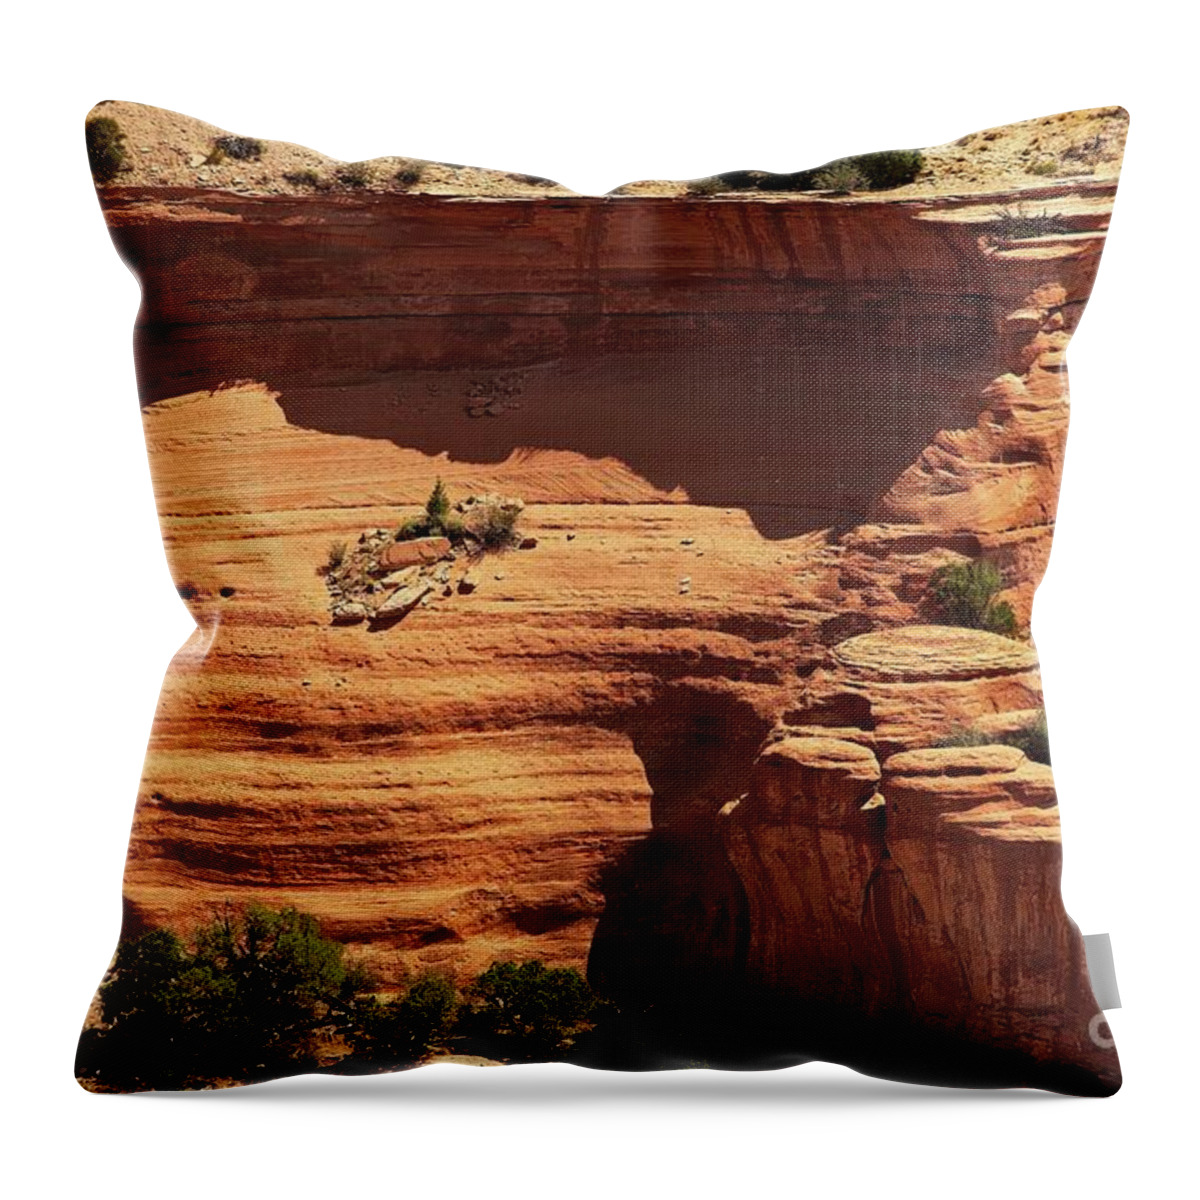 Jon Burch Throw Pillow featuring the photograph My Sediments Exactly by Jon Burch Photography